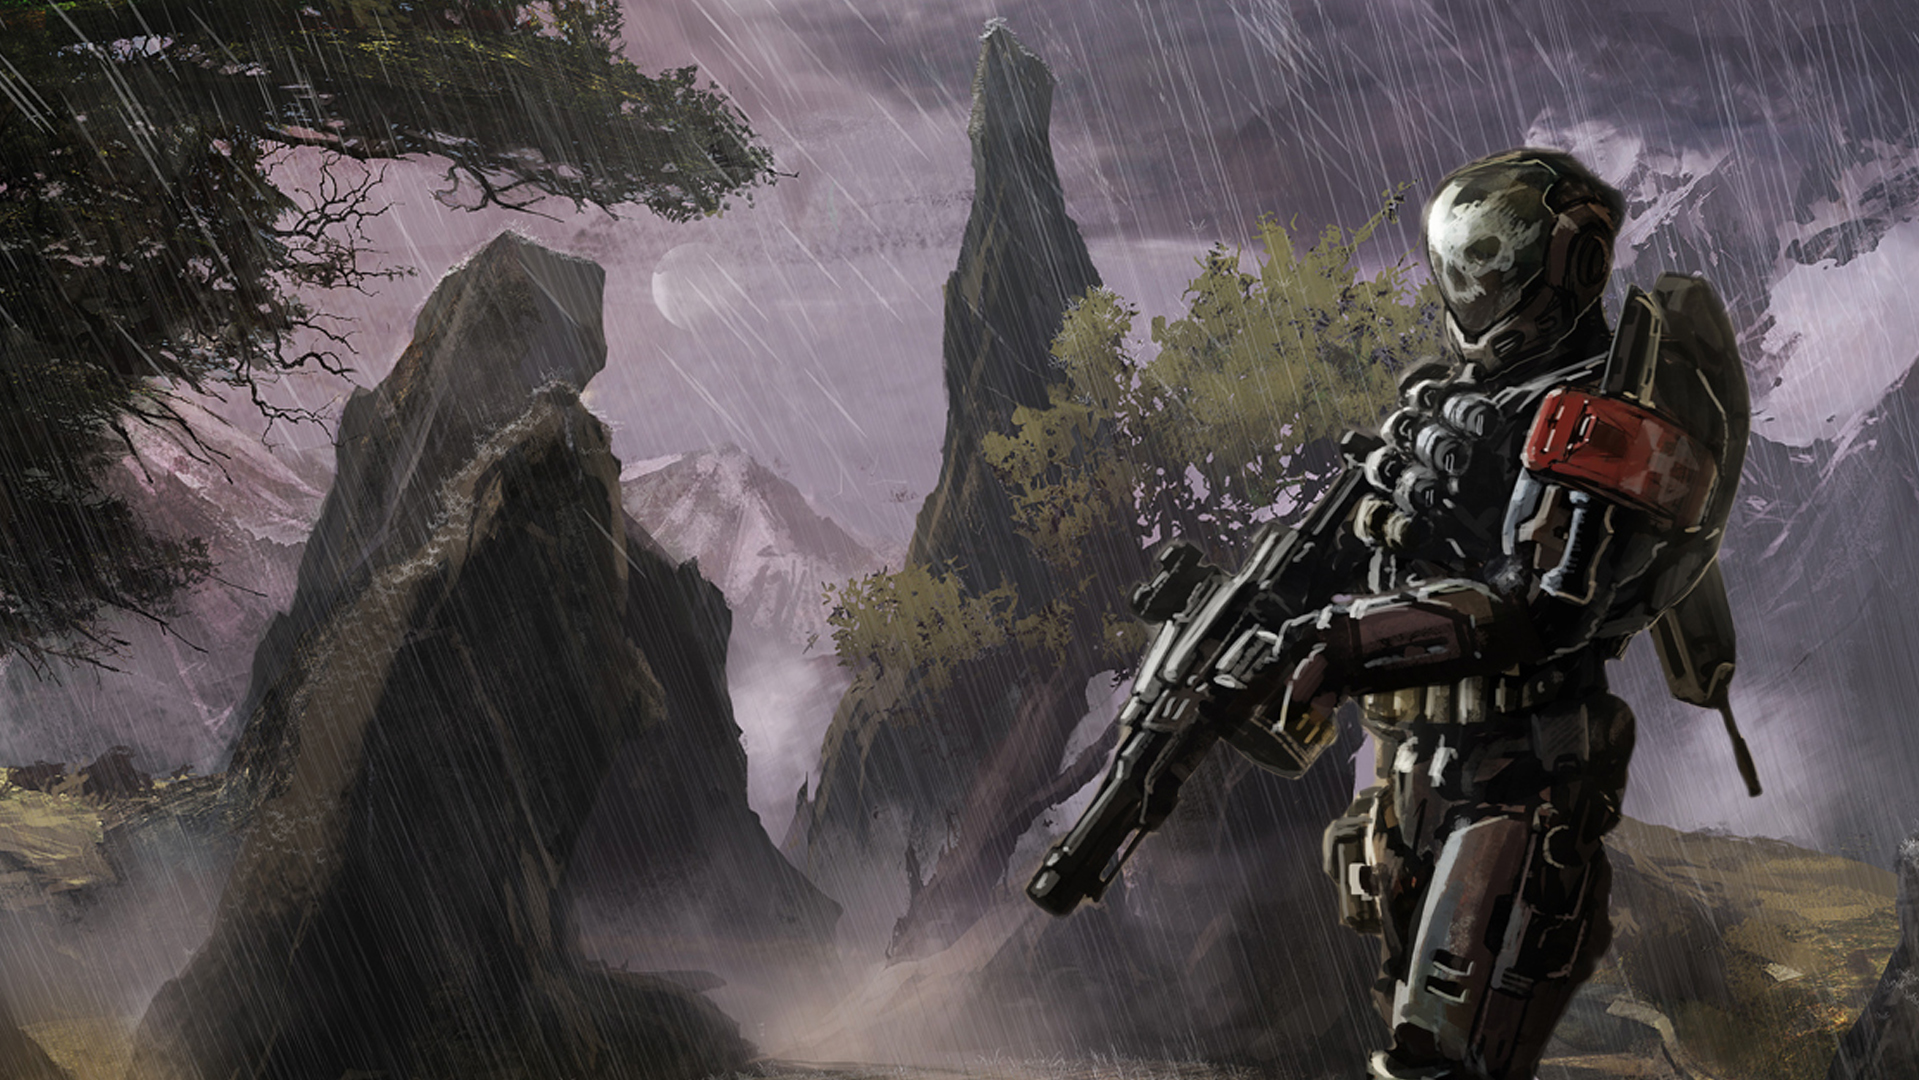 Halo Reach Emile Wallpapers